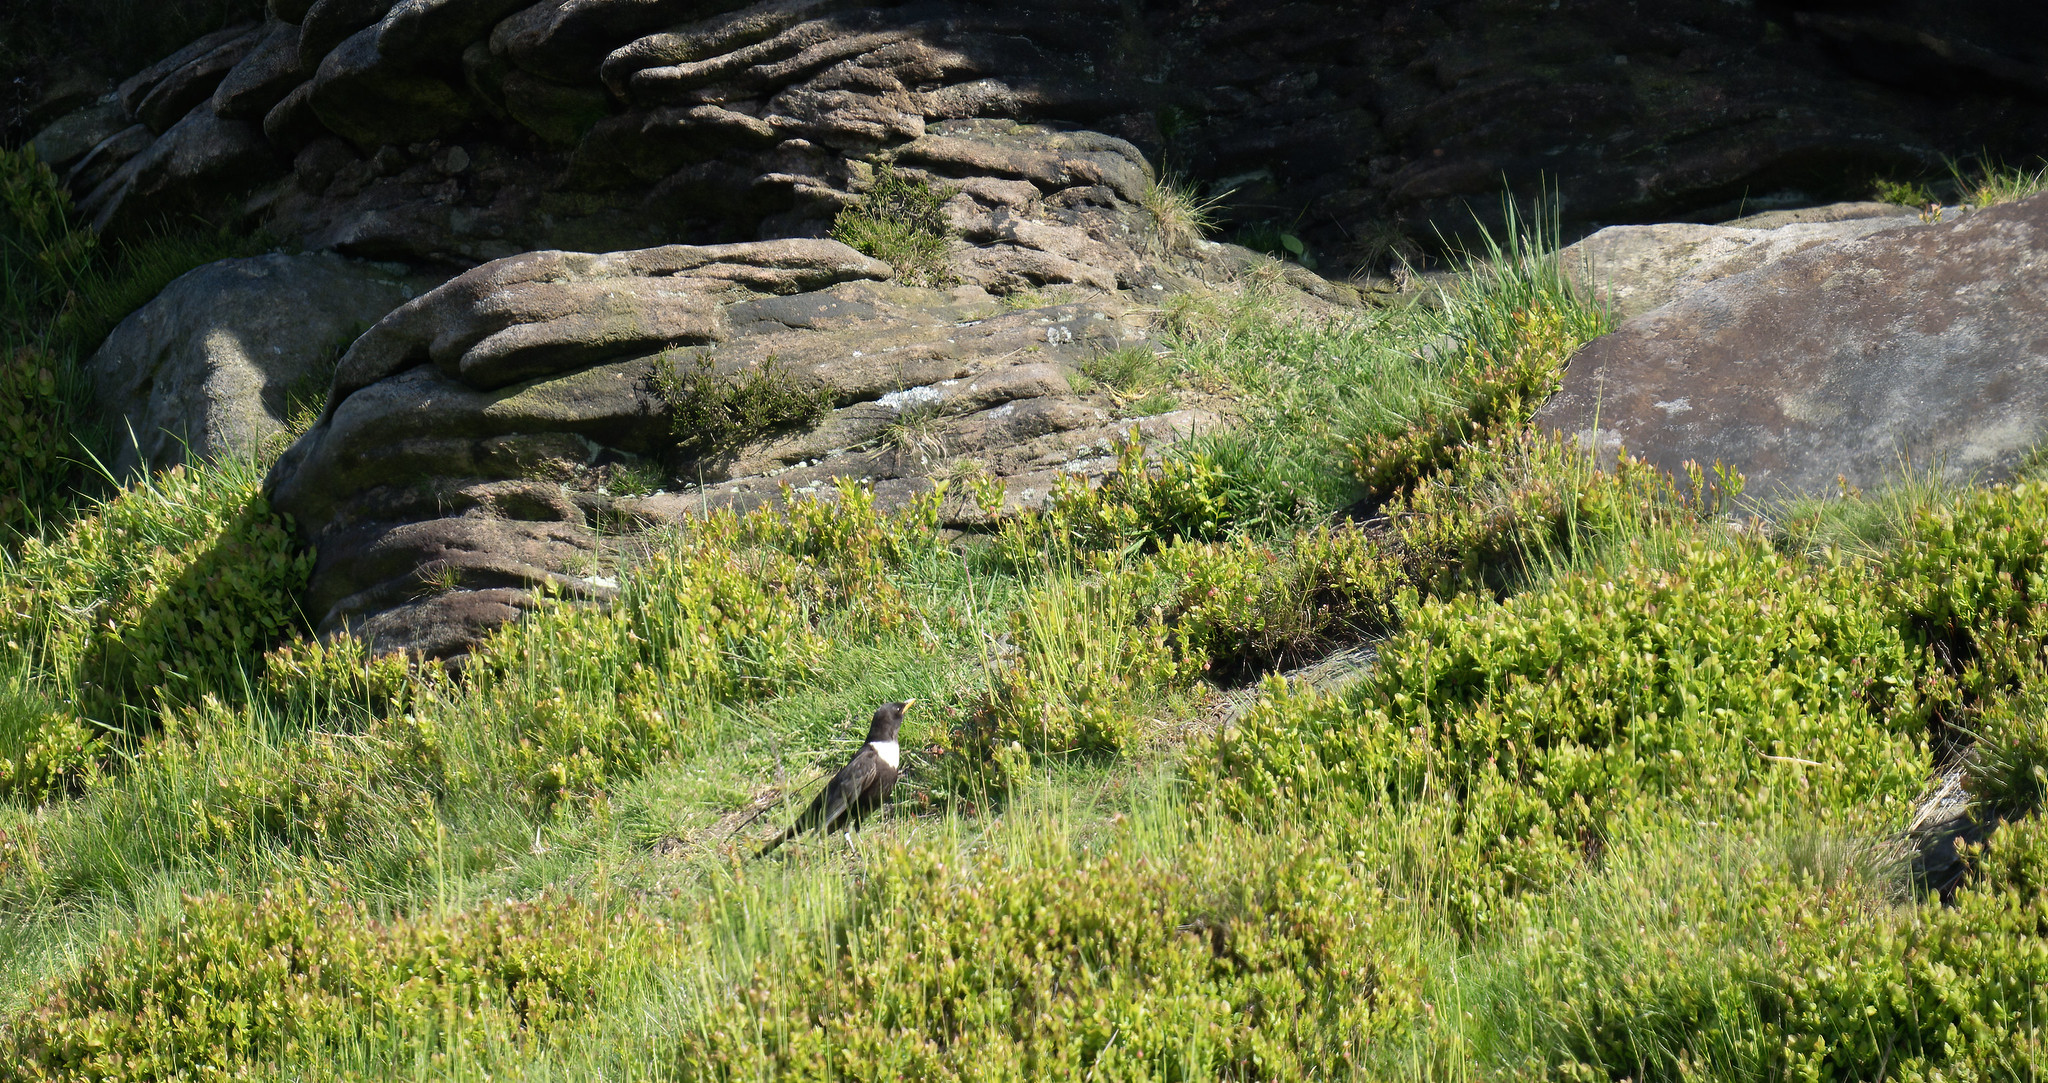 Distant Ring Ouzel